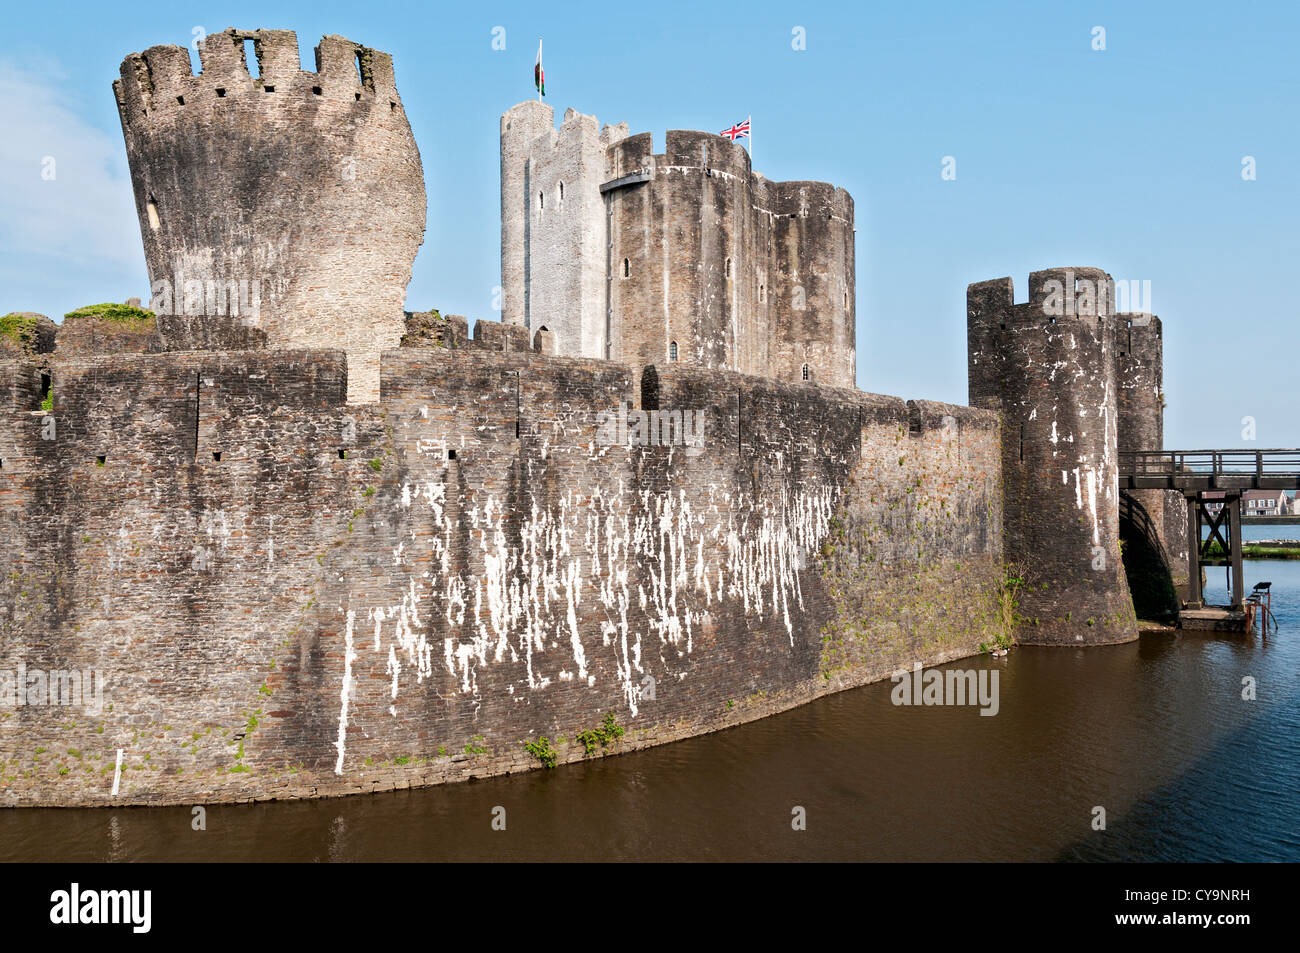 Wales, Caerphilly Castle, construction began 1268, moat, Welsh flags Stock Photo